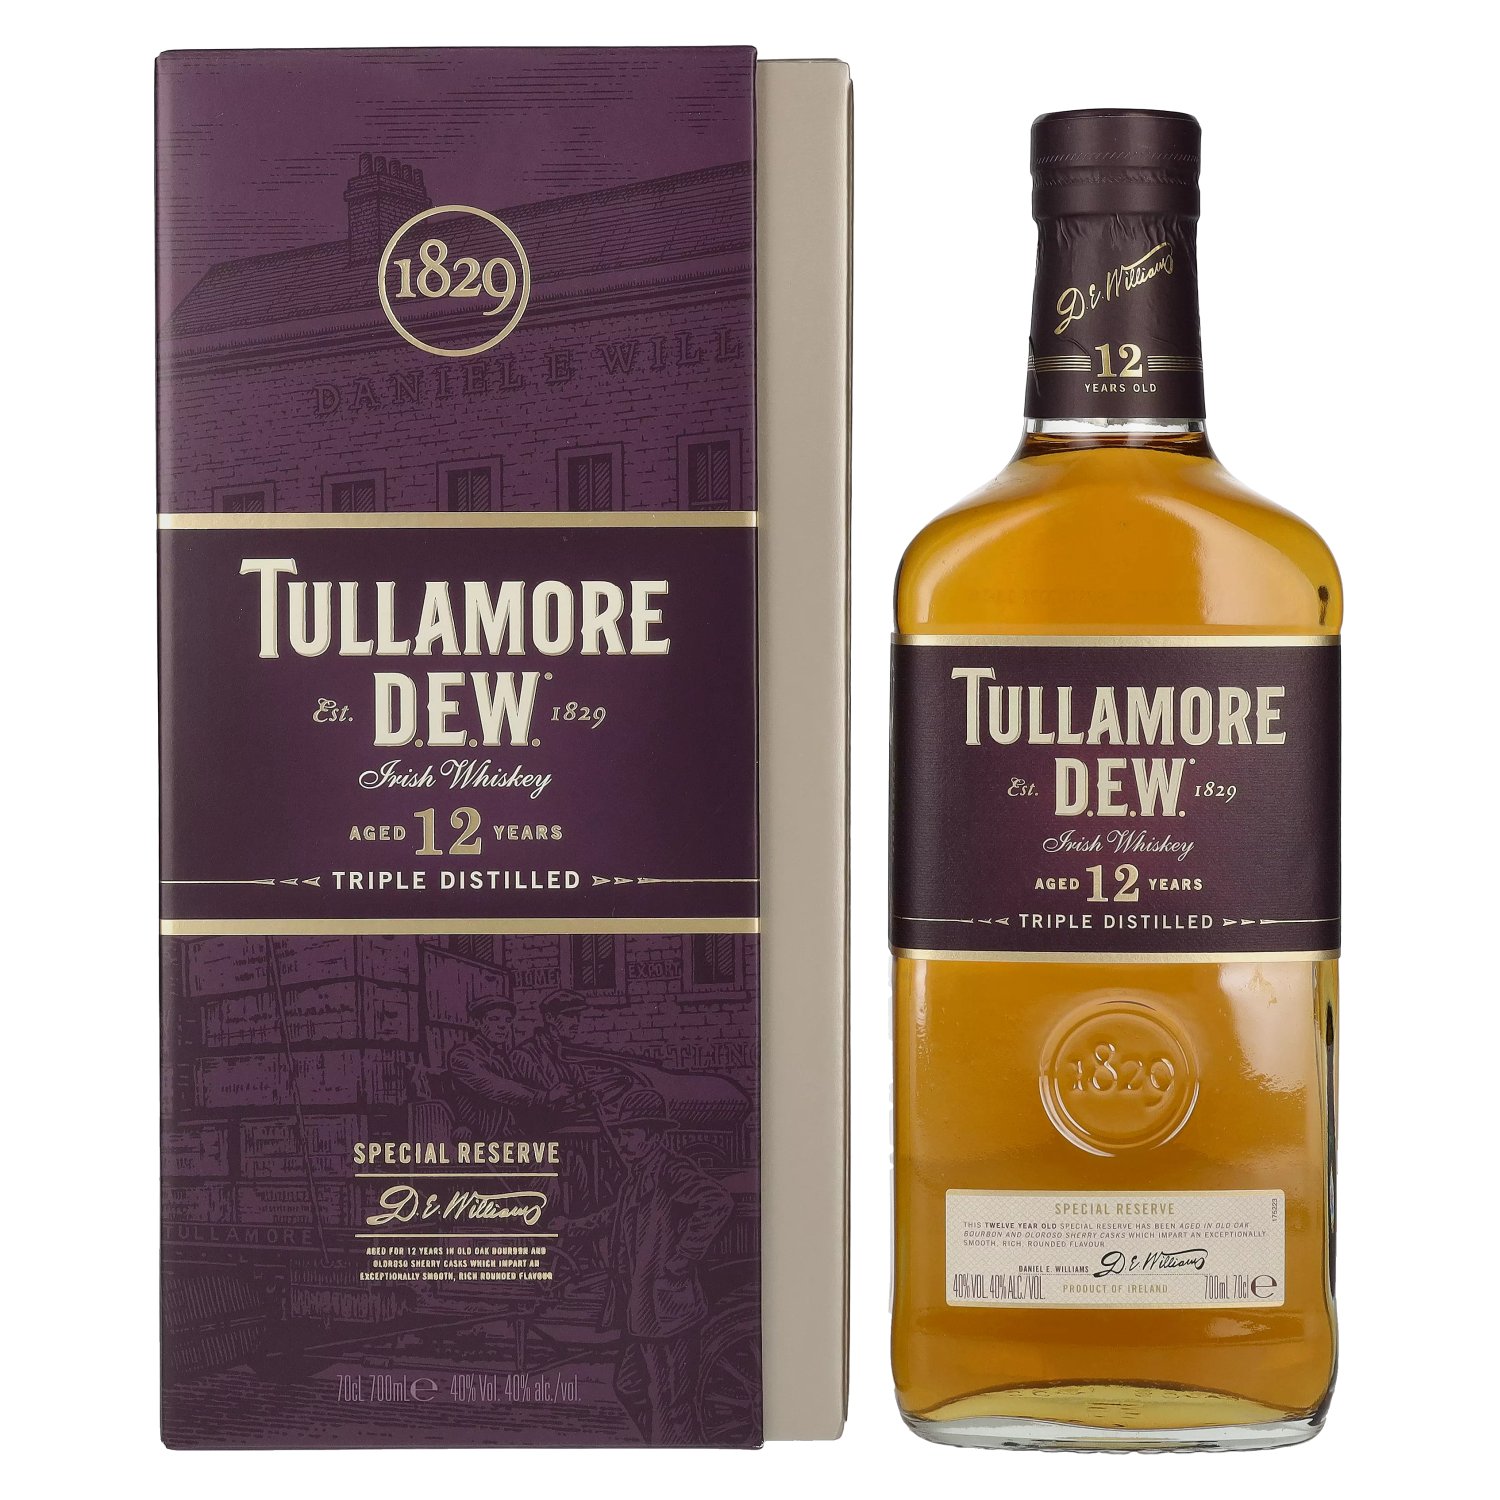 12 Old 40% Giftbox Years D.E.W. 0,7l Irish Special Reserve in Whiskey Vol. Tullamore